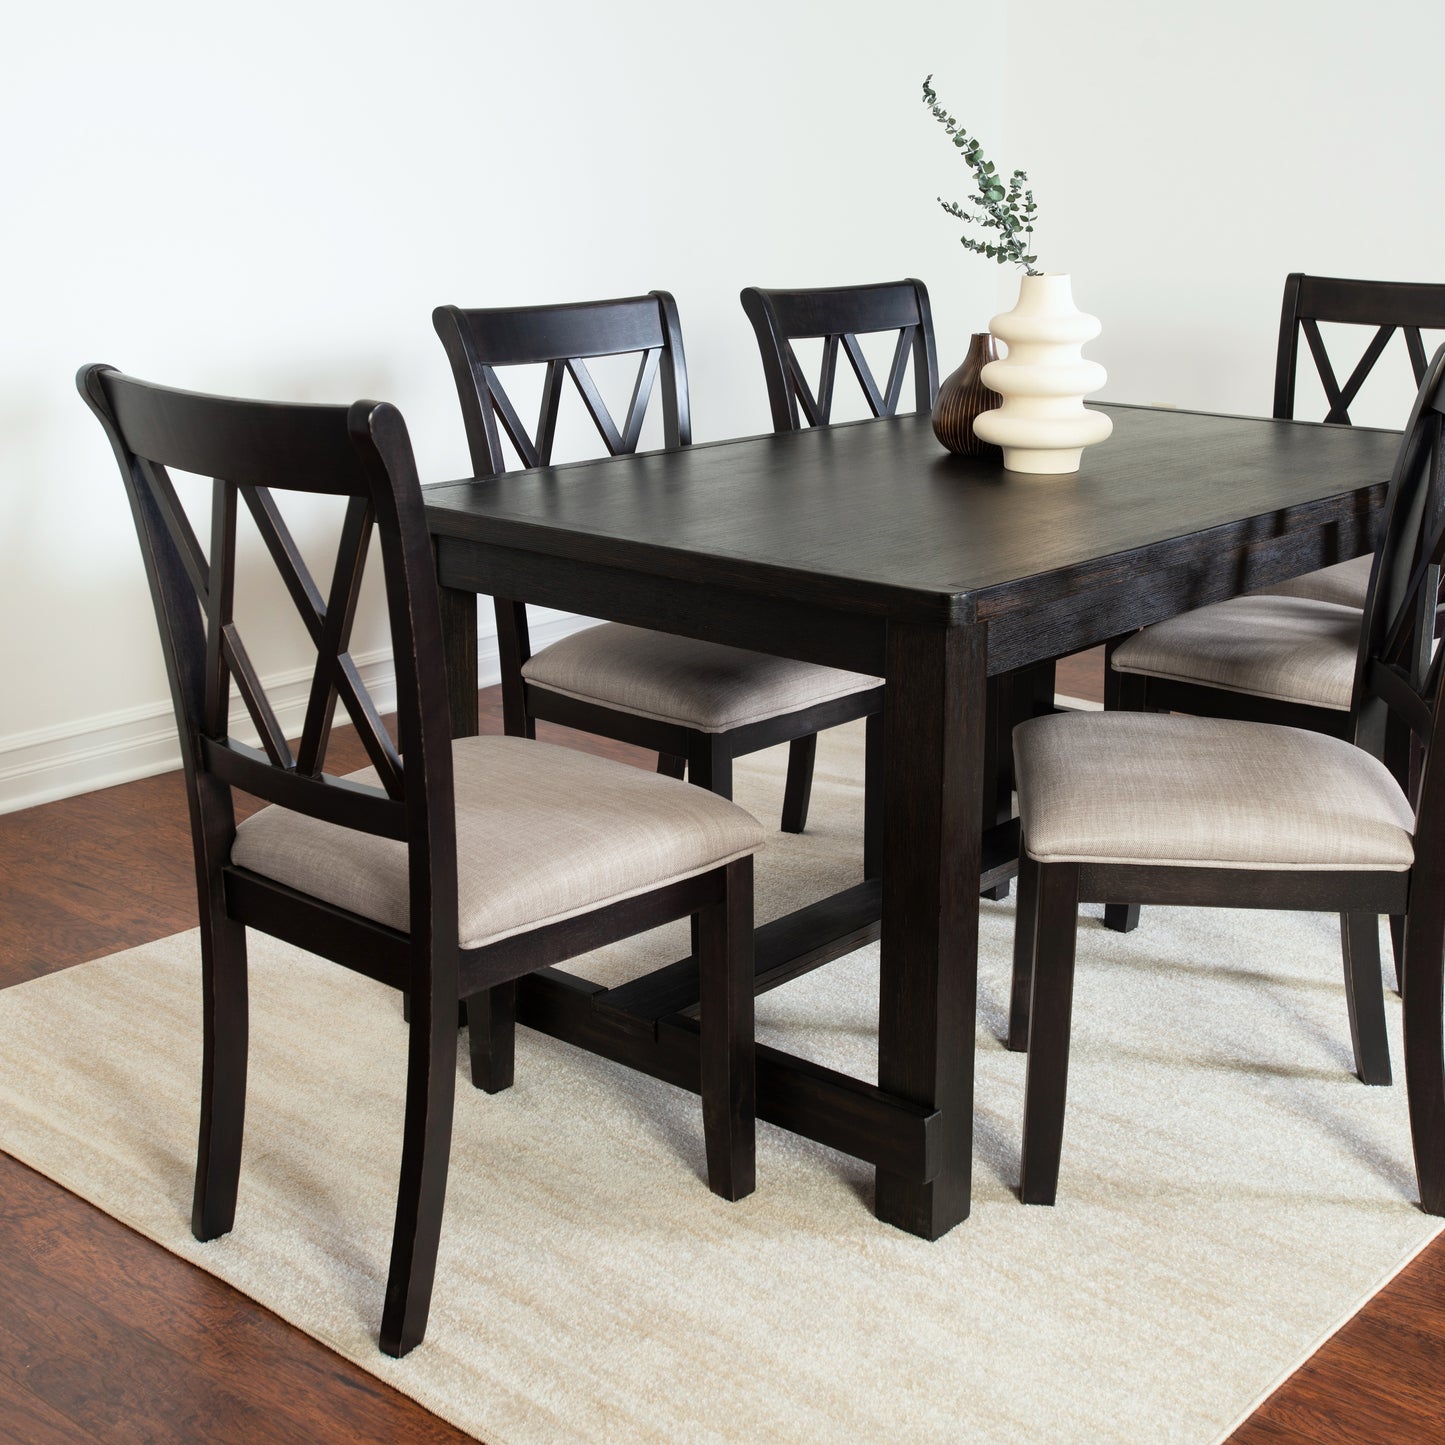 Hensfield Contemporary 7-Piece Dining Set, Dining Table with 6 Cross-back Chairs, Rich Black